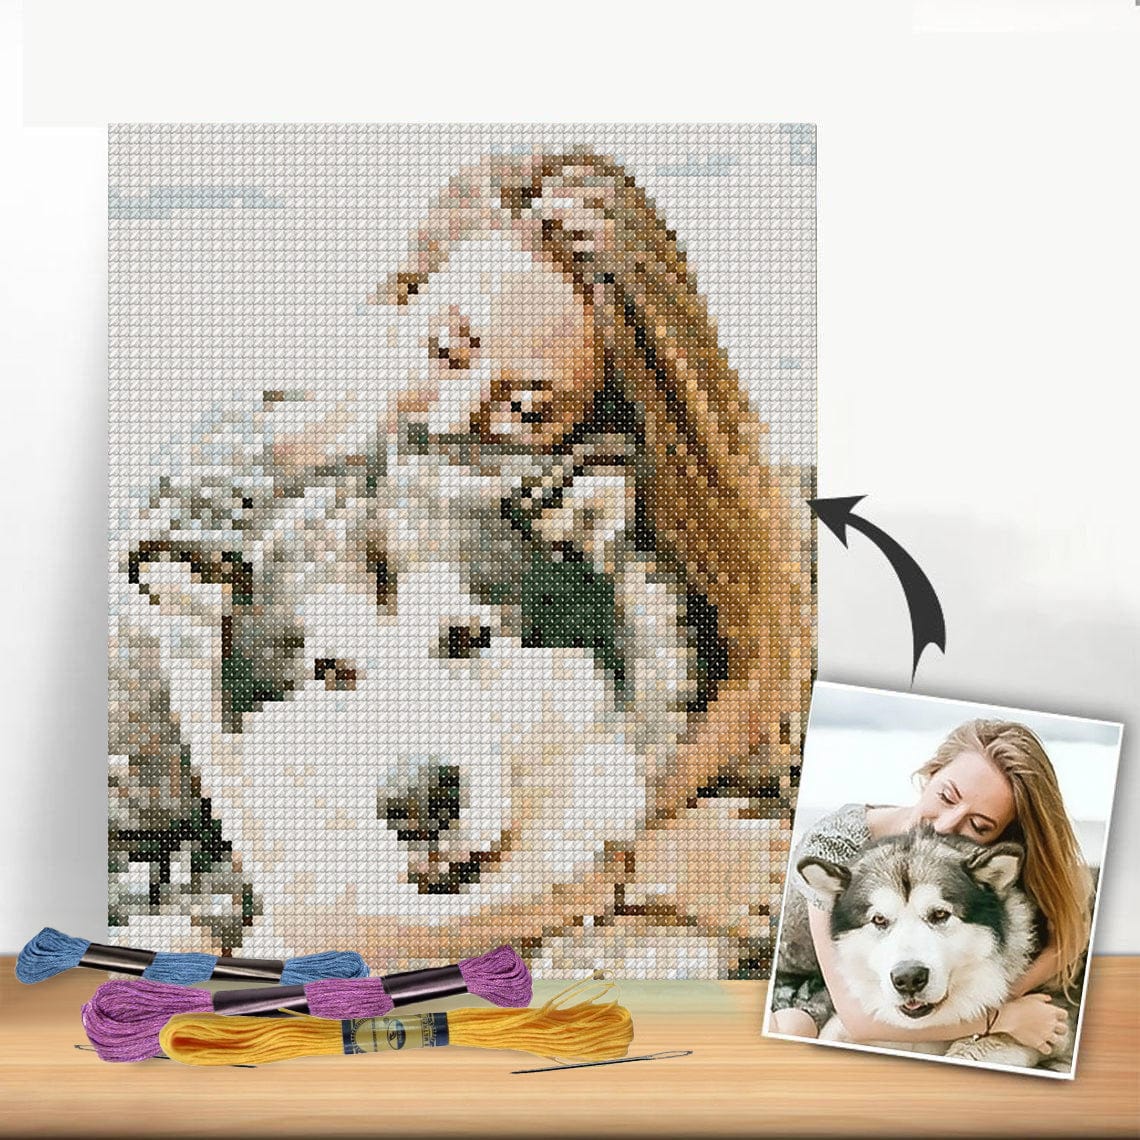 Custom Cross Stitch Tapestry Kit | Just Upload Your Photo! - Cross Stitched